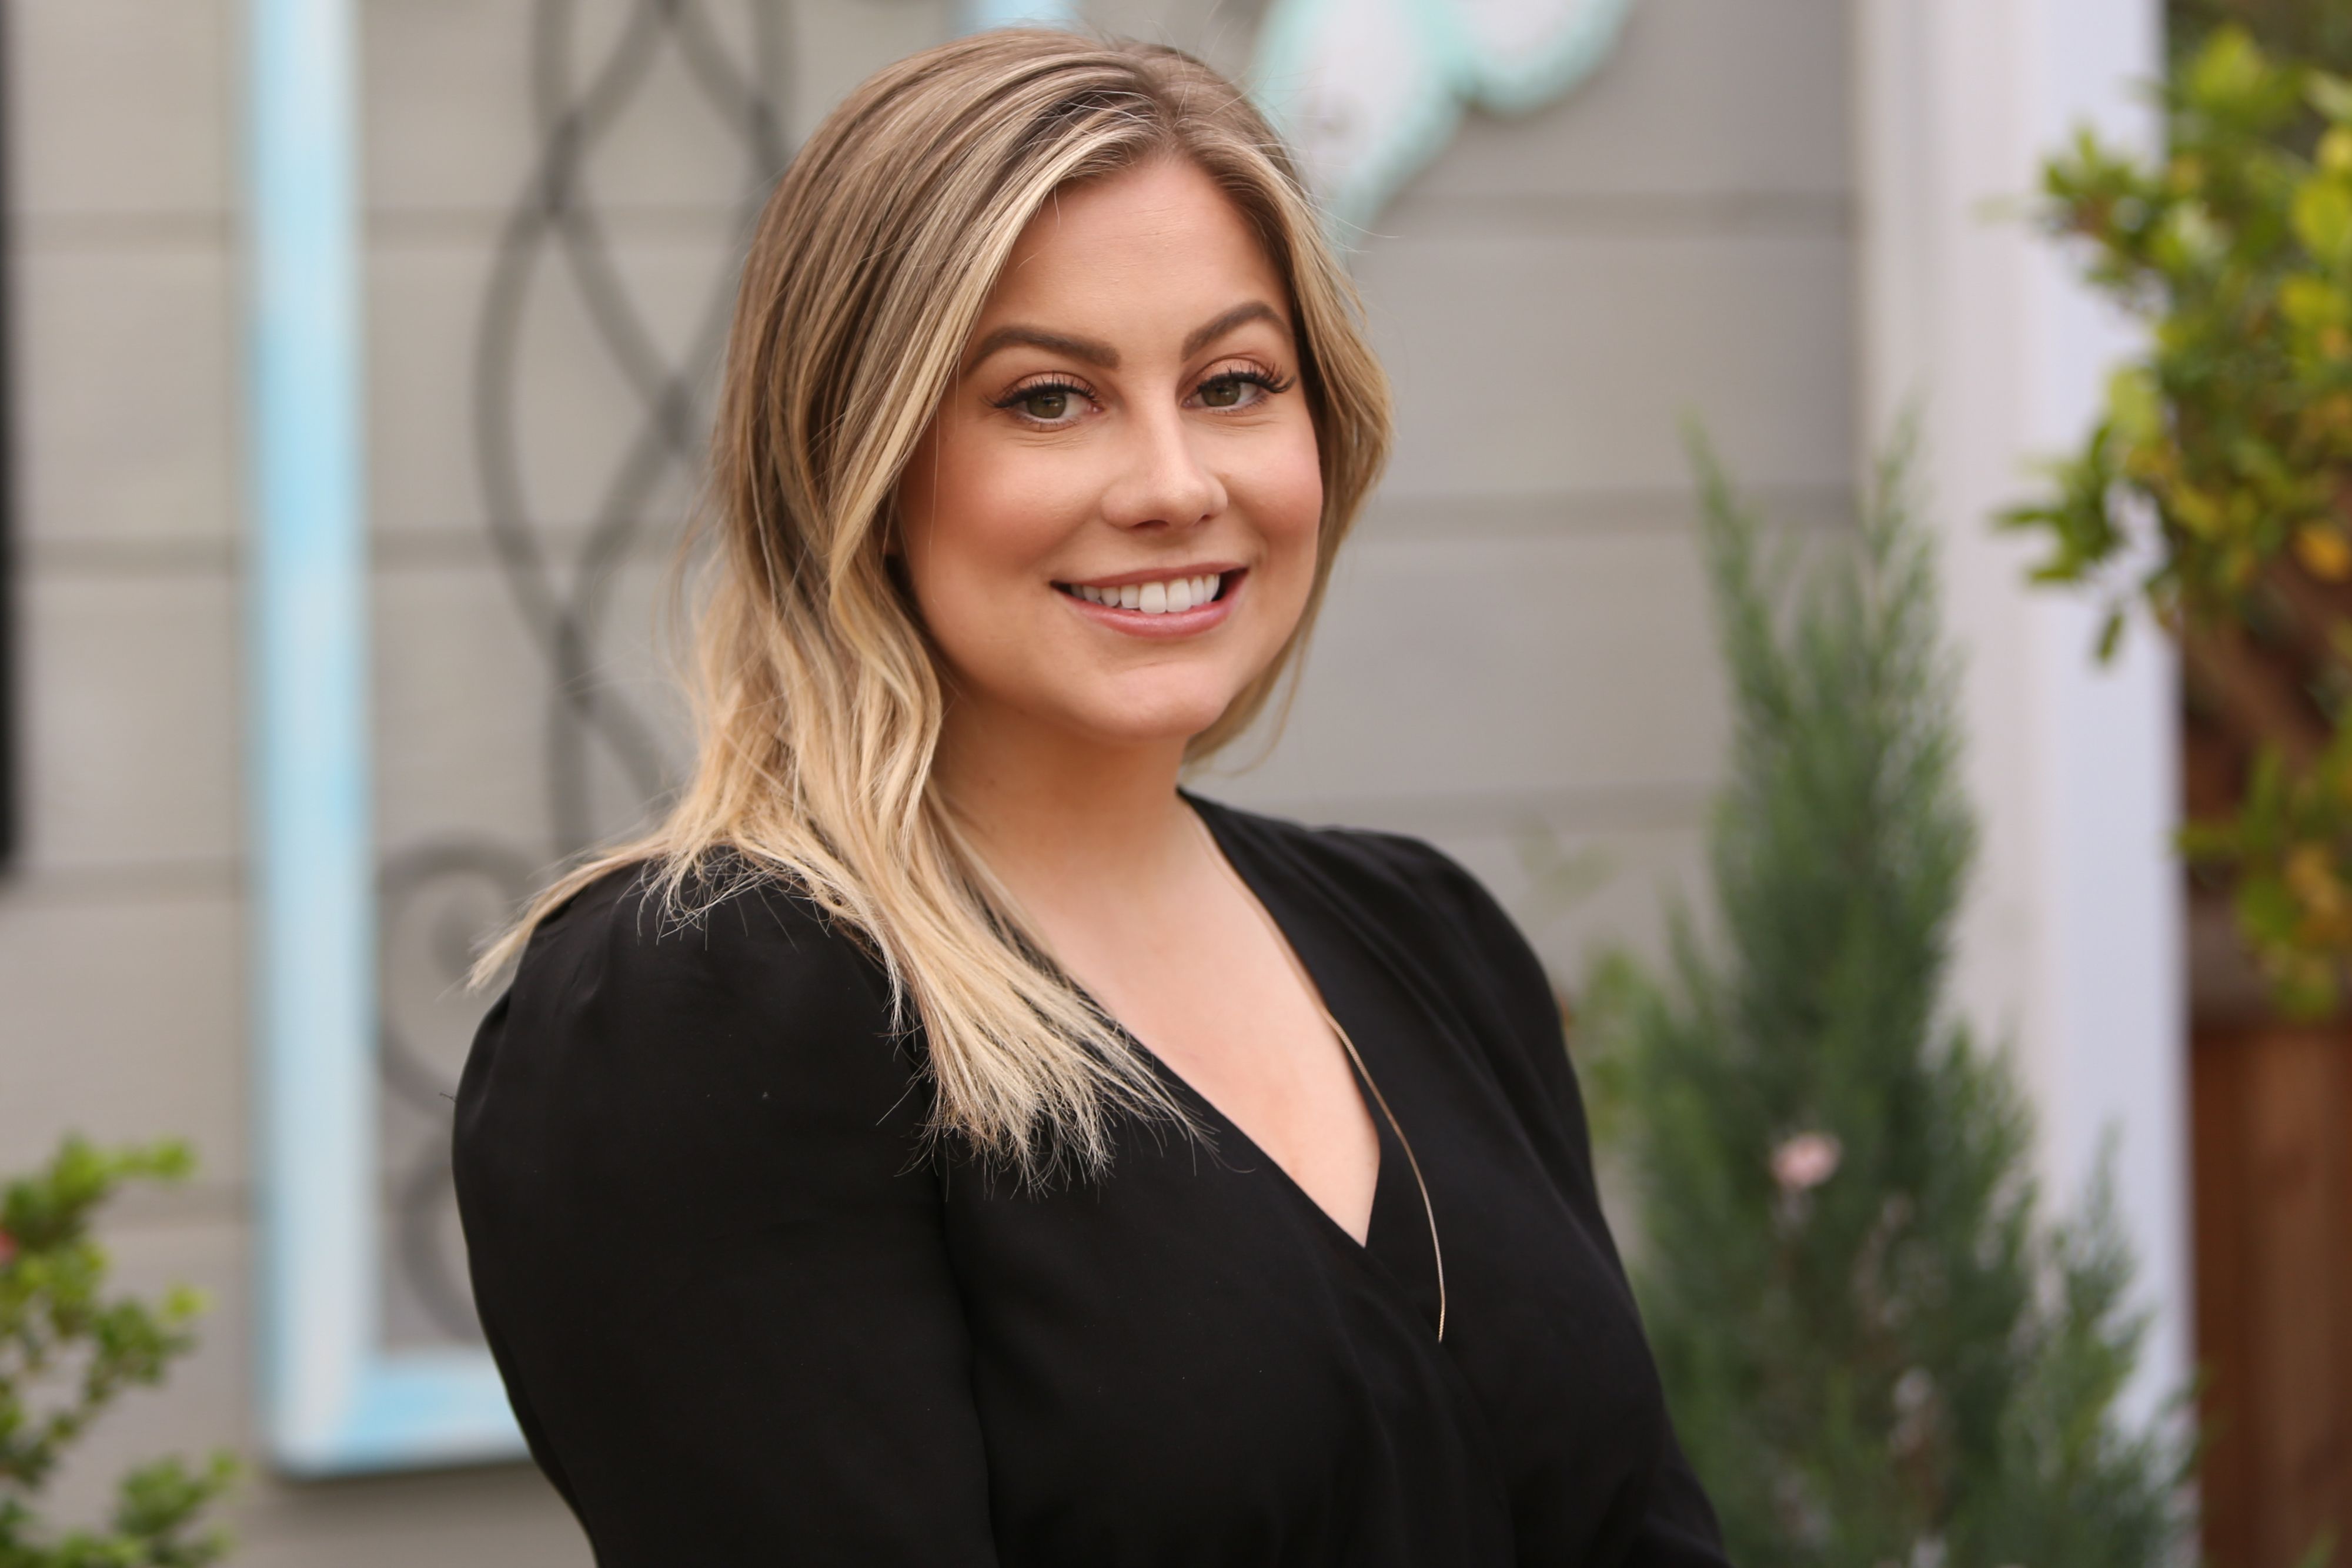 Shawn Johnson visited Hallmark's "Home & Family" at Universal Studios Hollywood on April 24, 2019| Photo: Getty Images